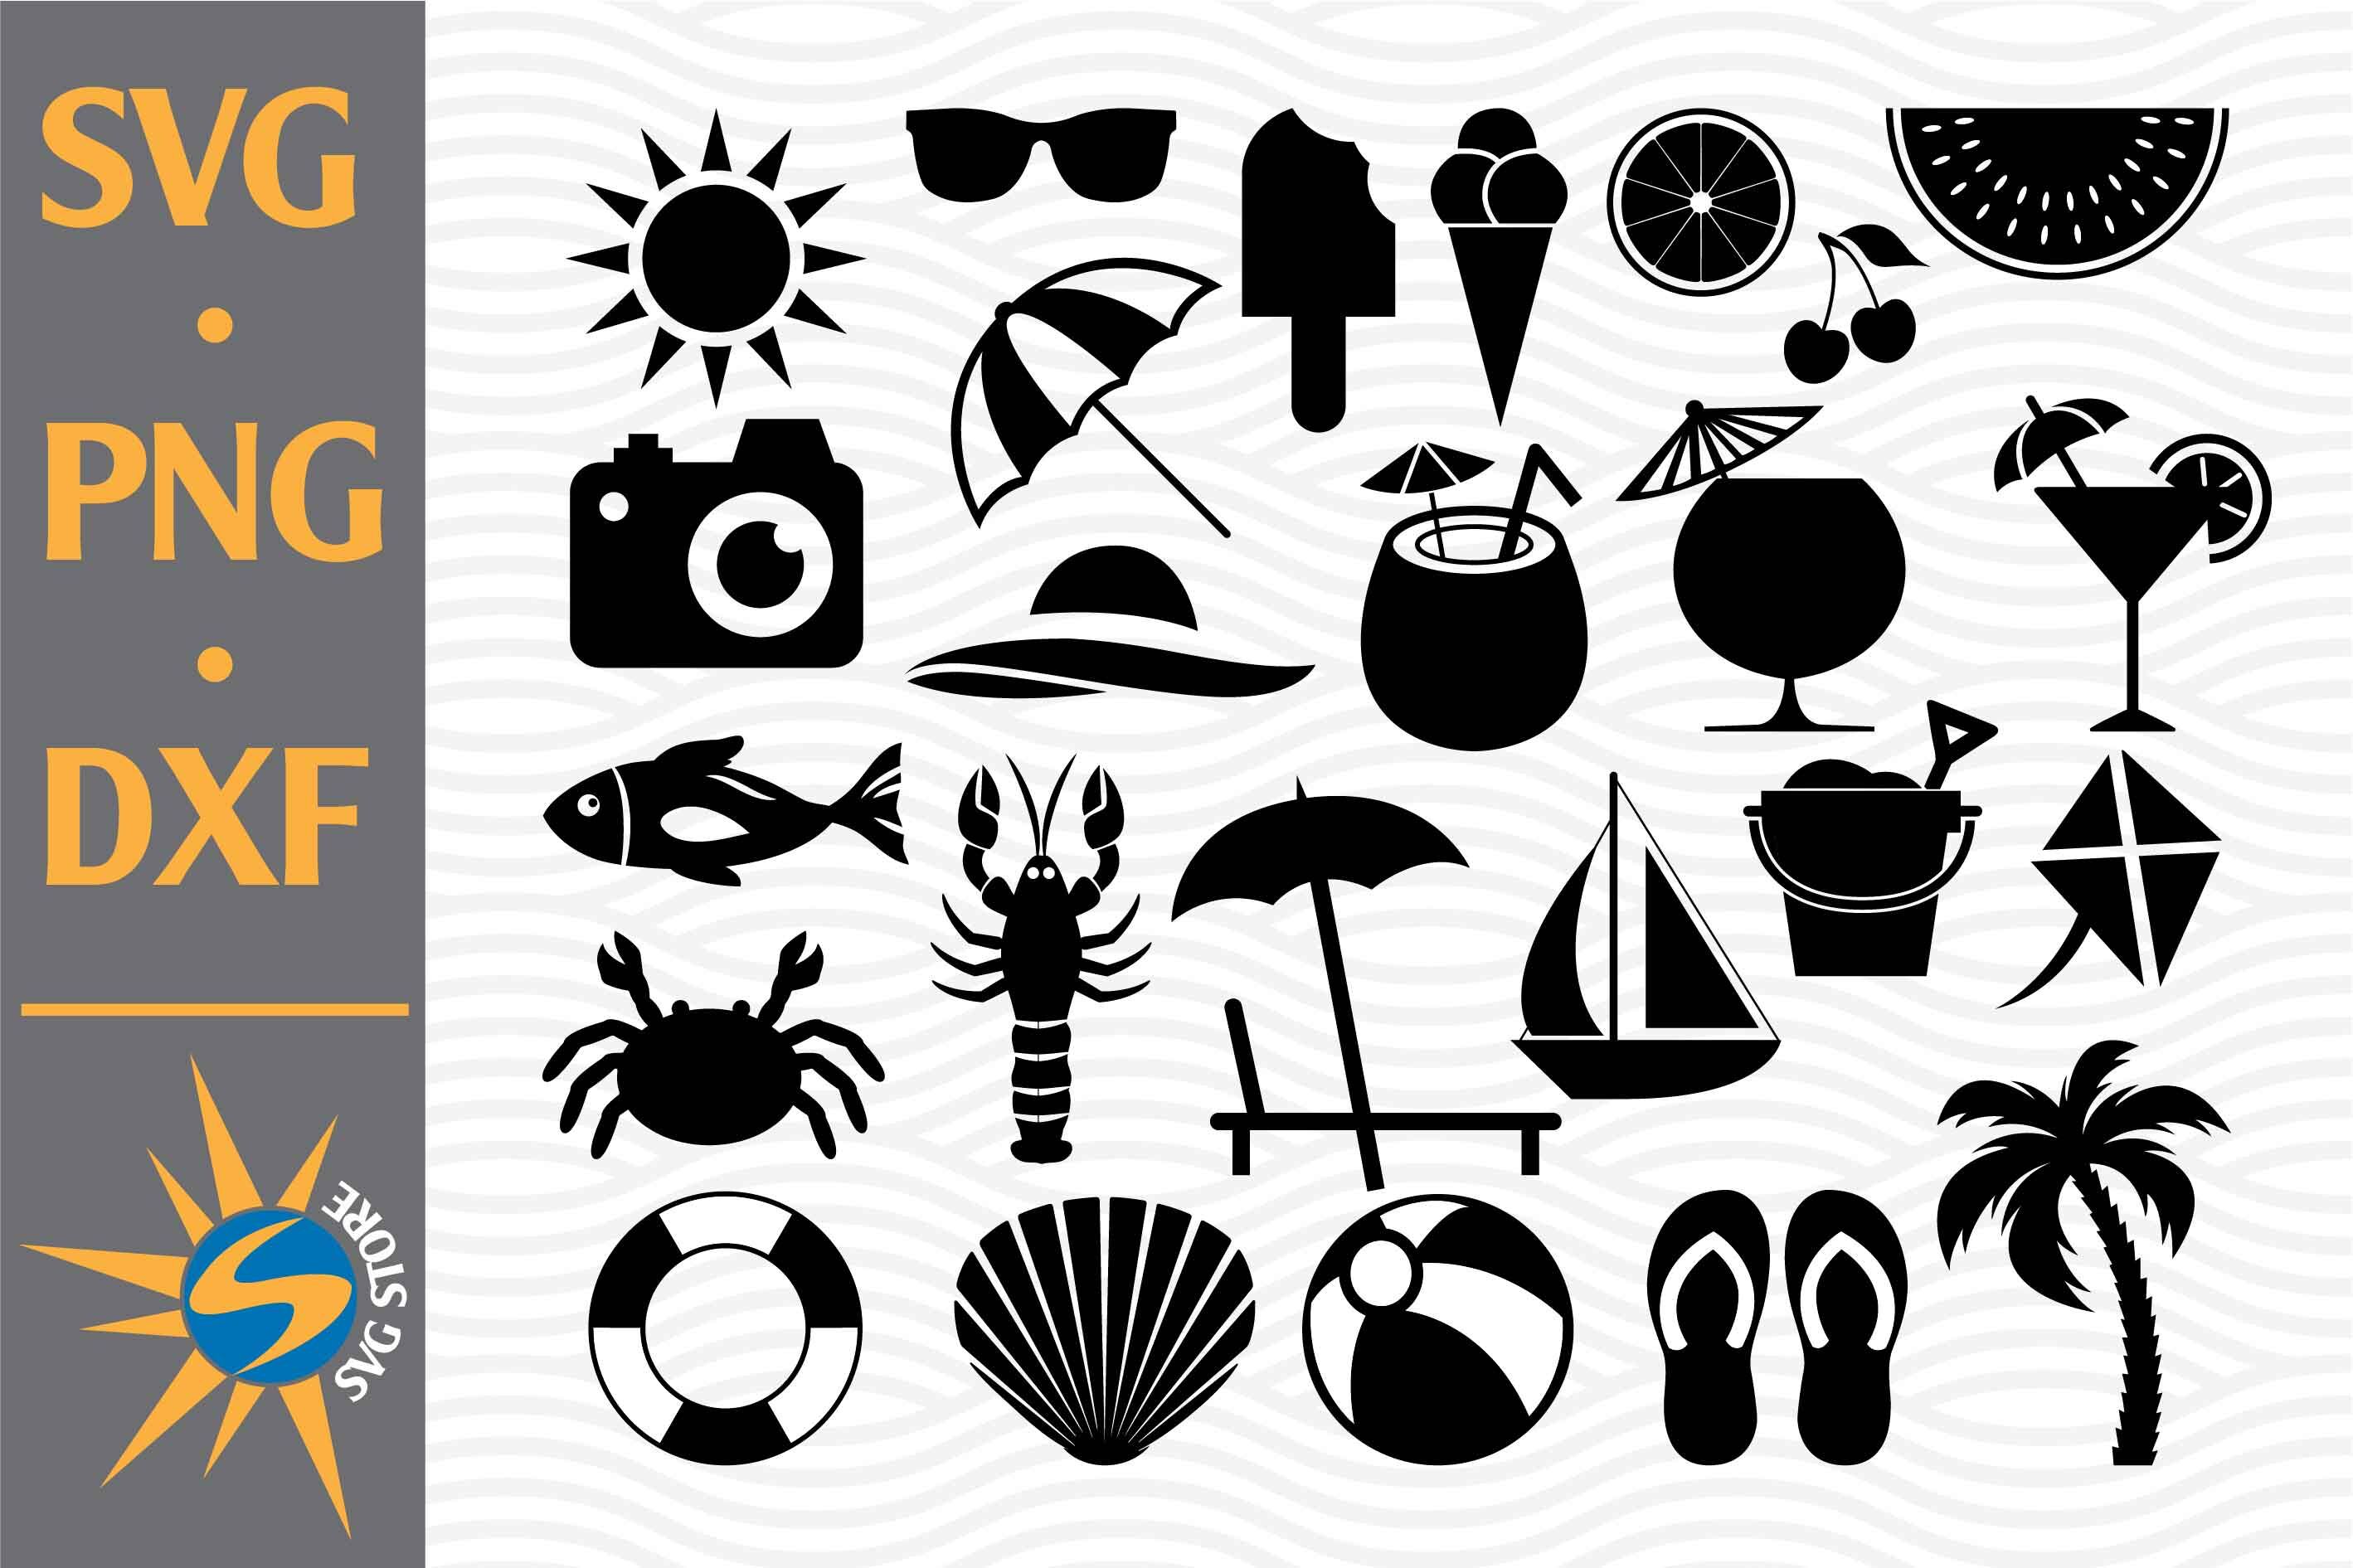 Basic Shape Silhouette SVG, PNG, DXF Digital Files Include By SVGStoreShop